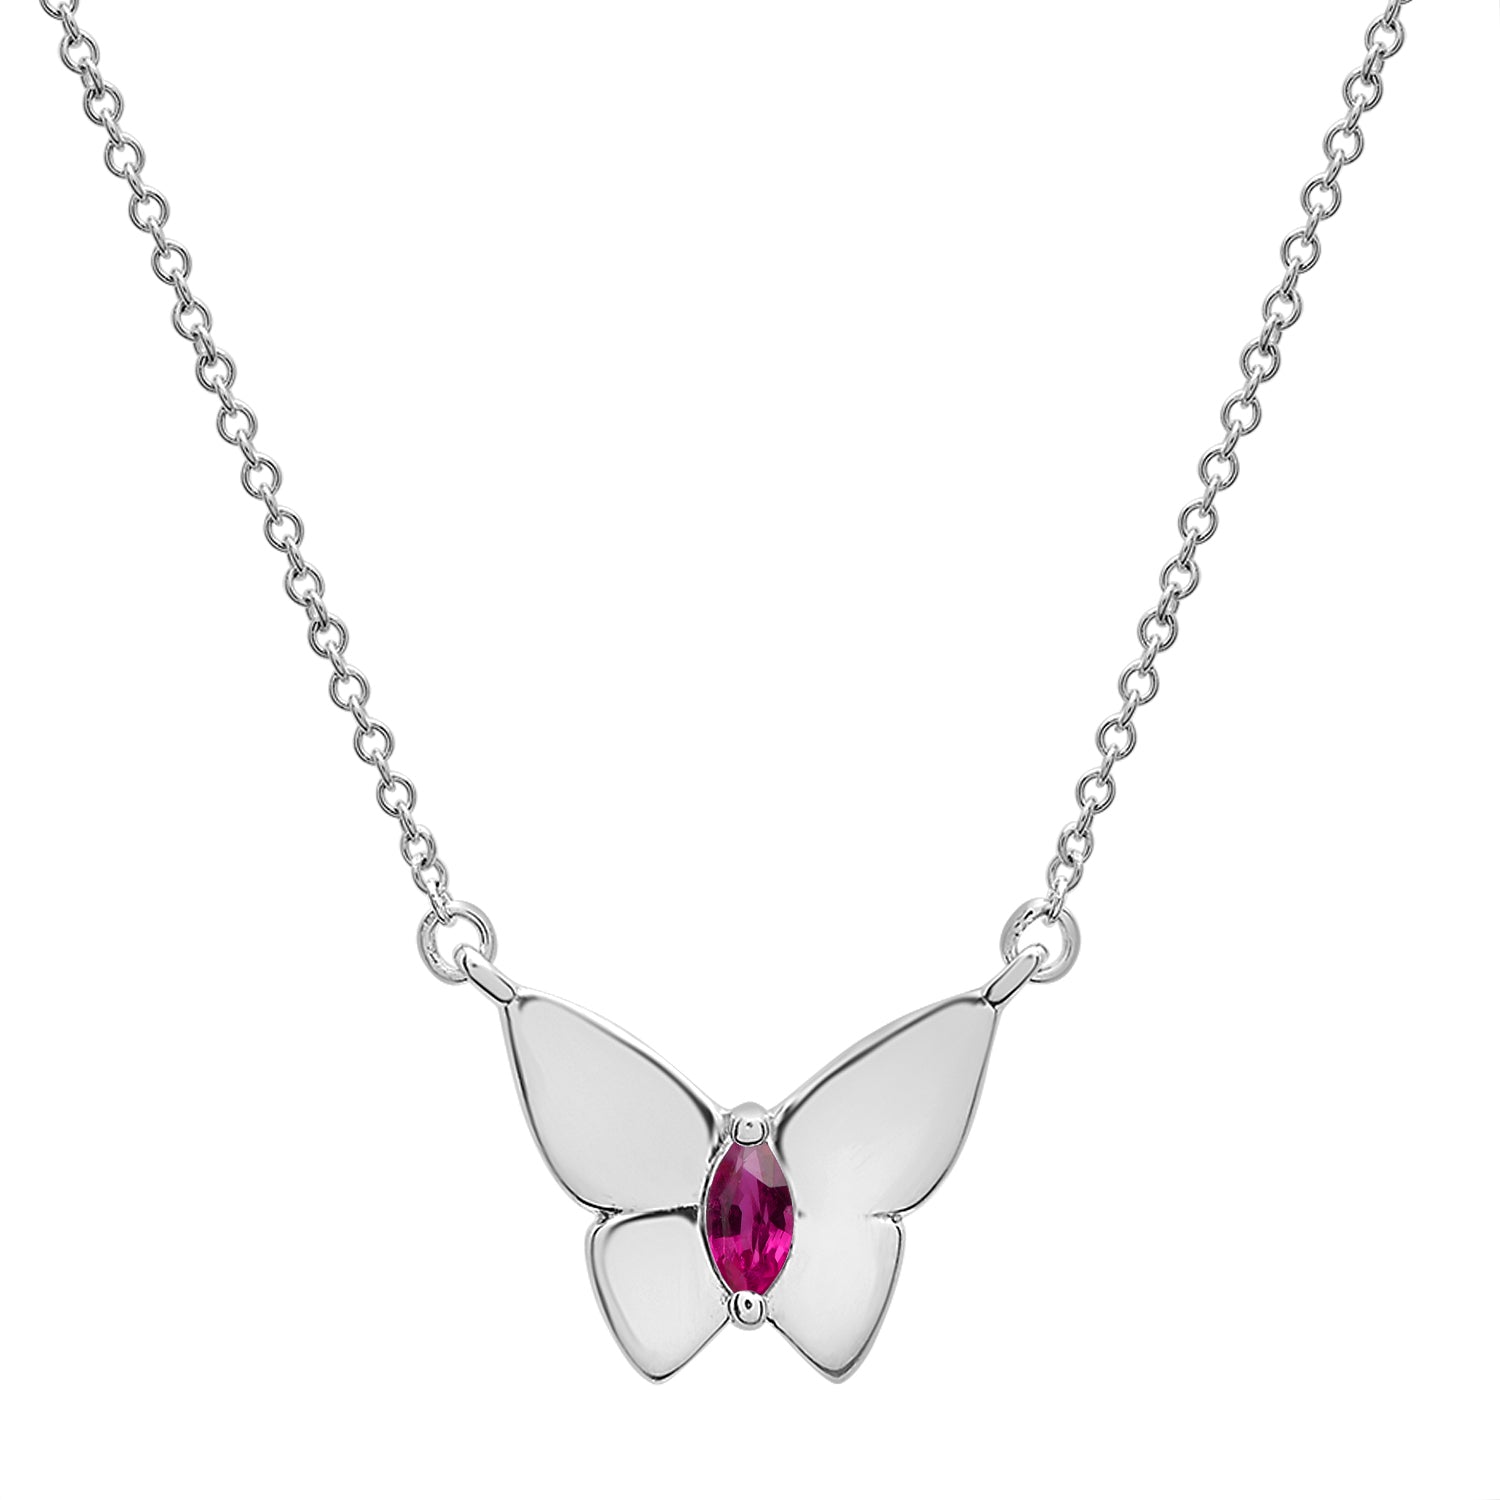 Ruby Stone Butterfly Birthstone Necklace with Silver chain